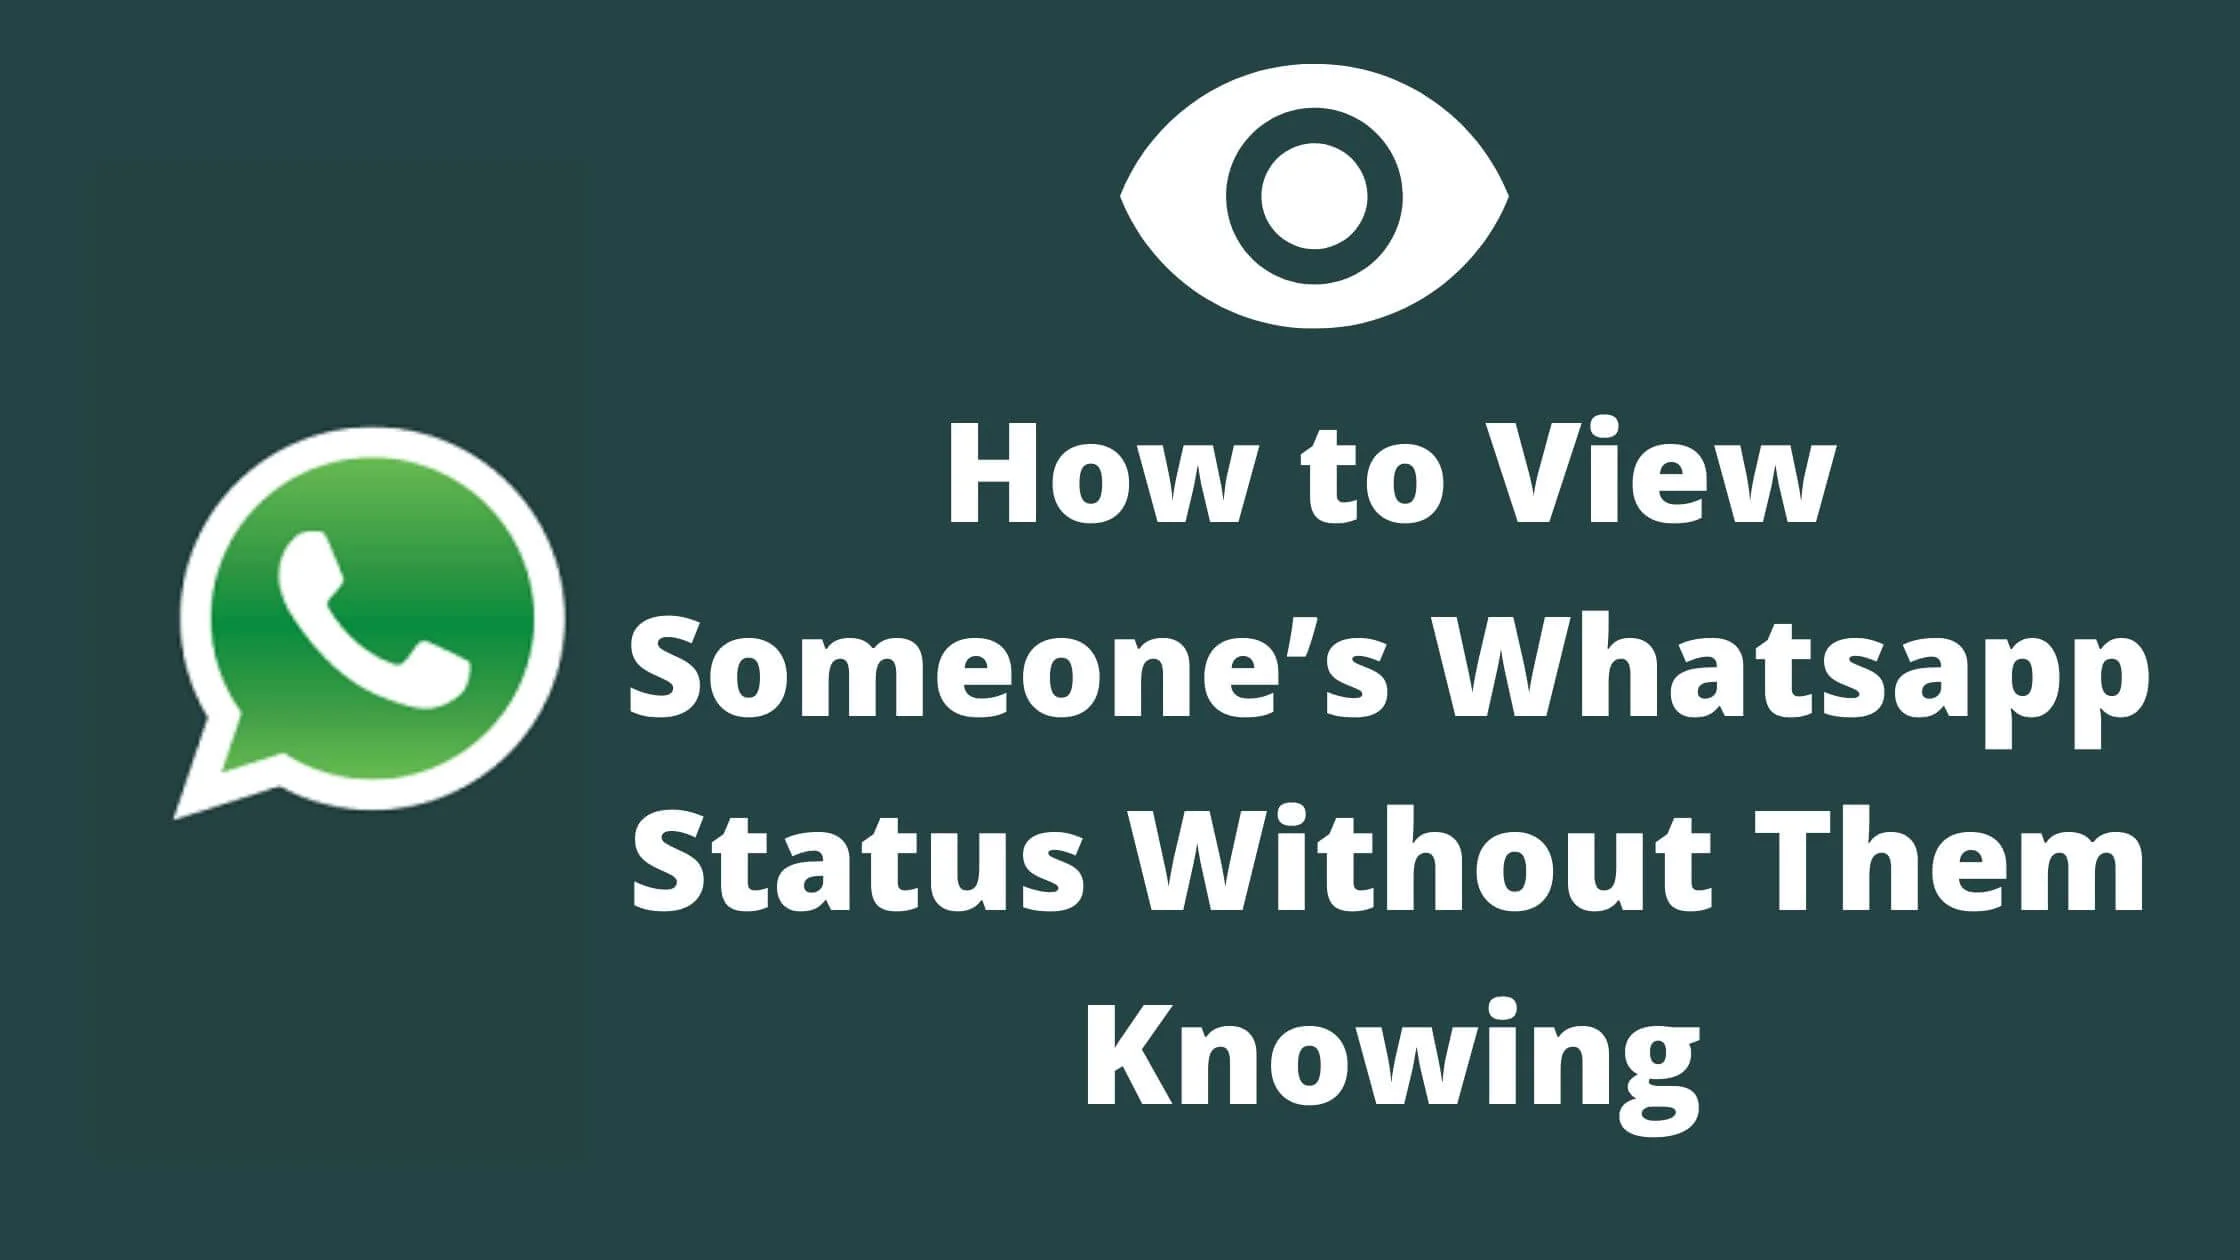 How to View Someone’s Whatsapp Status Without Them Knowing